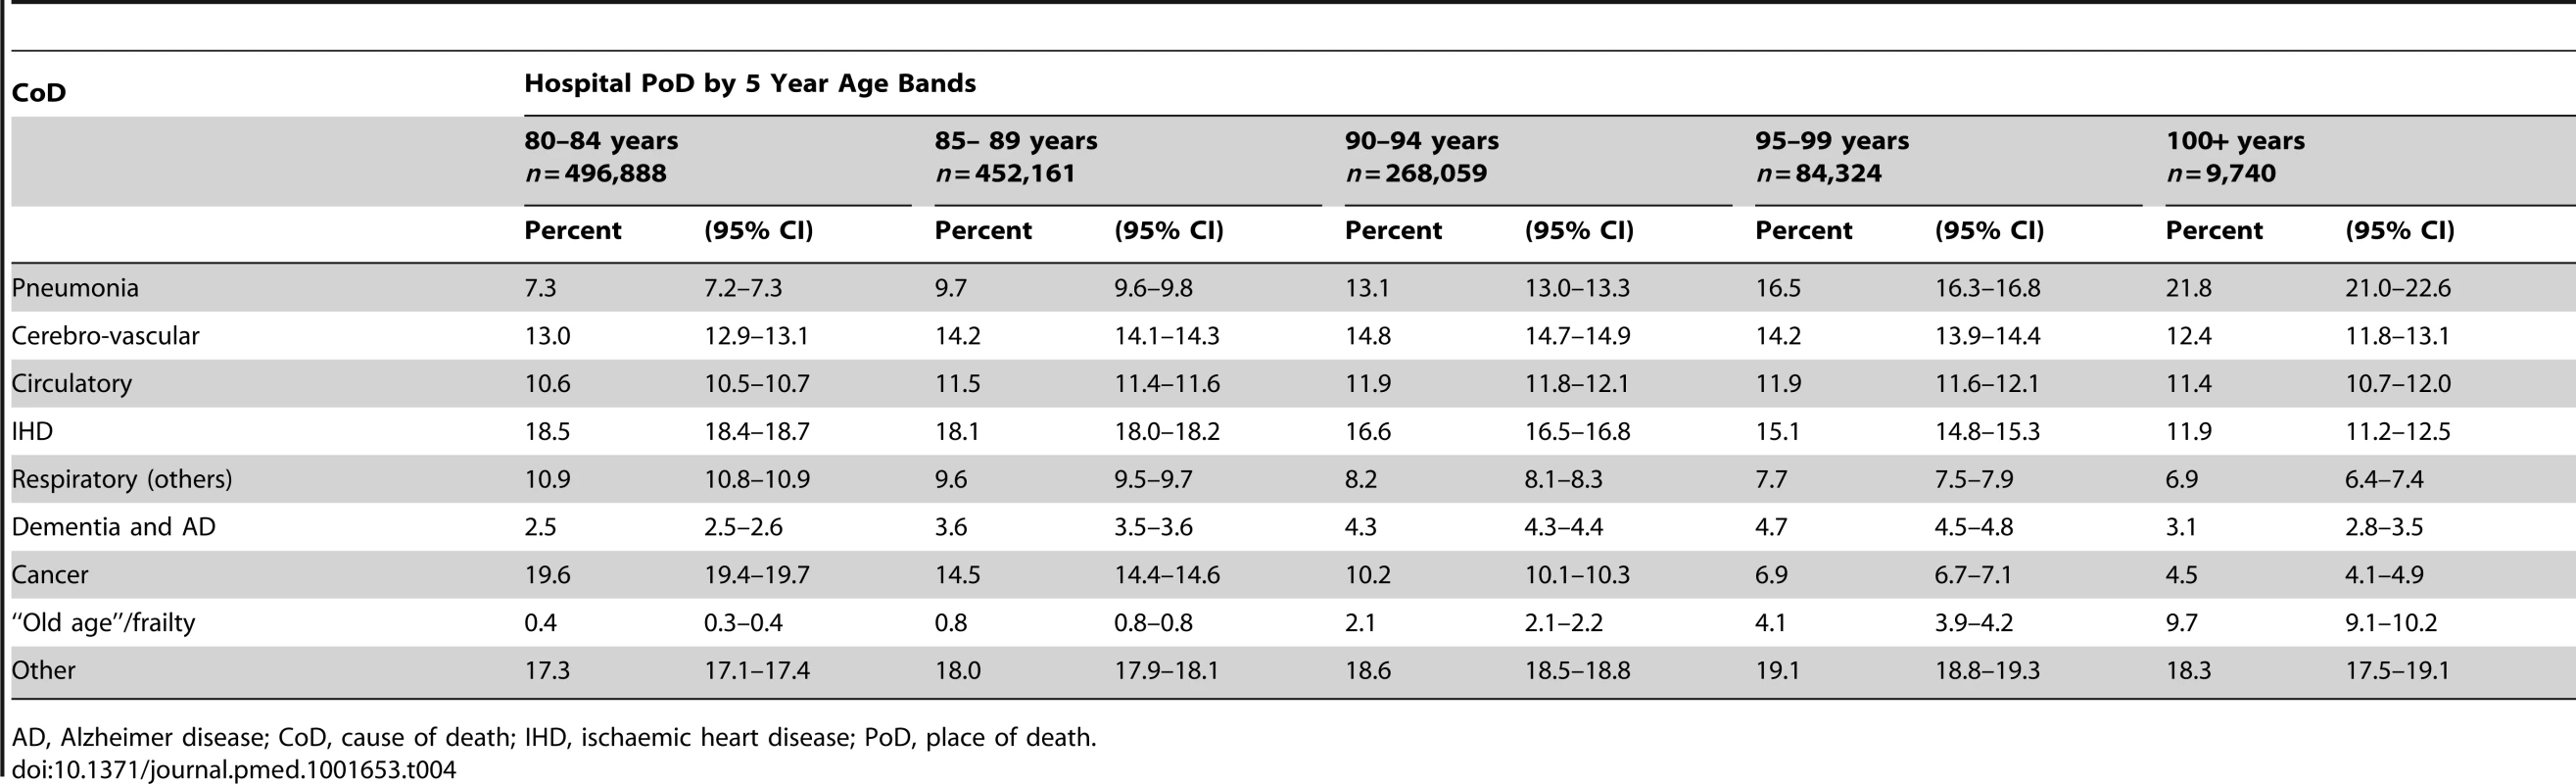 Cause of death by age bands and hospital as place of death.